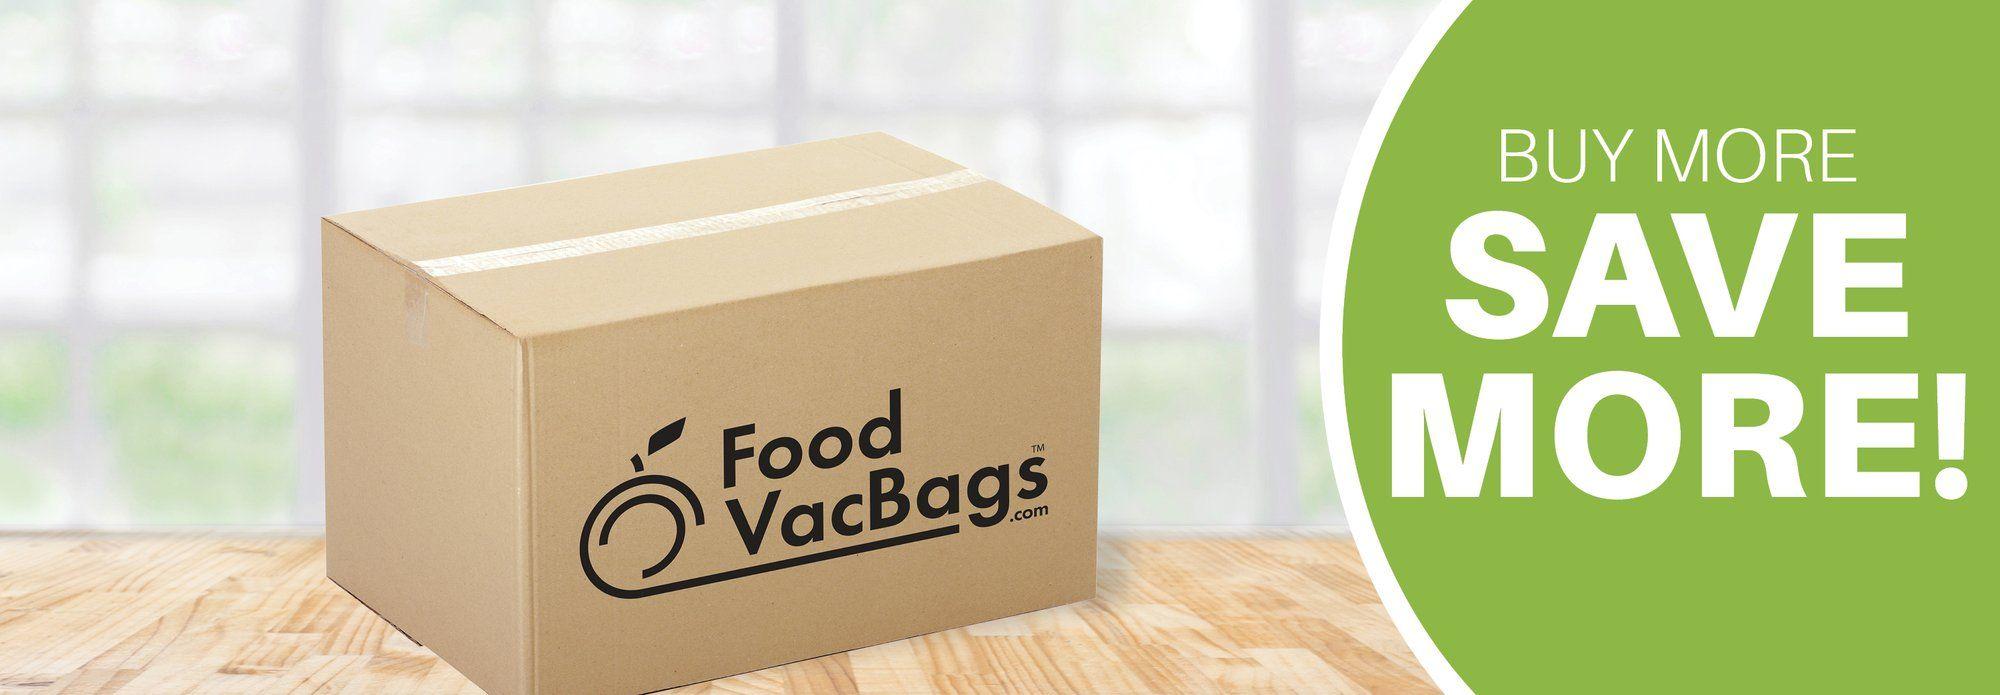 FoodSaver Logo - Vacuum Seal Bags & Rolls | Low Prices Free Shipping | FoodVacBags